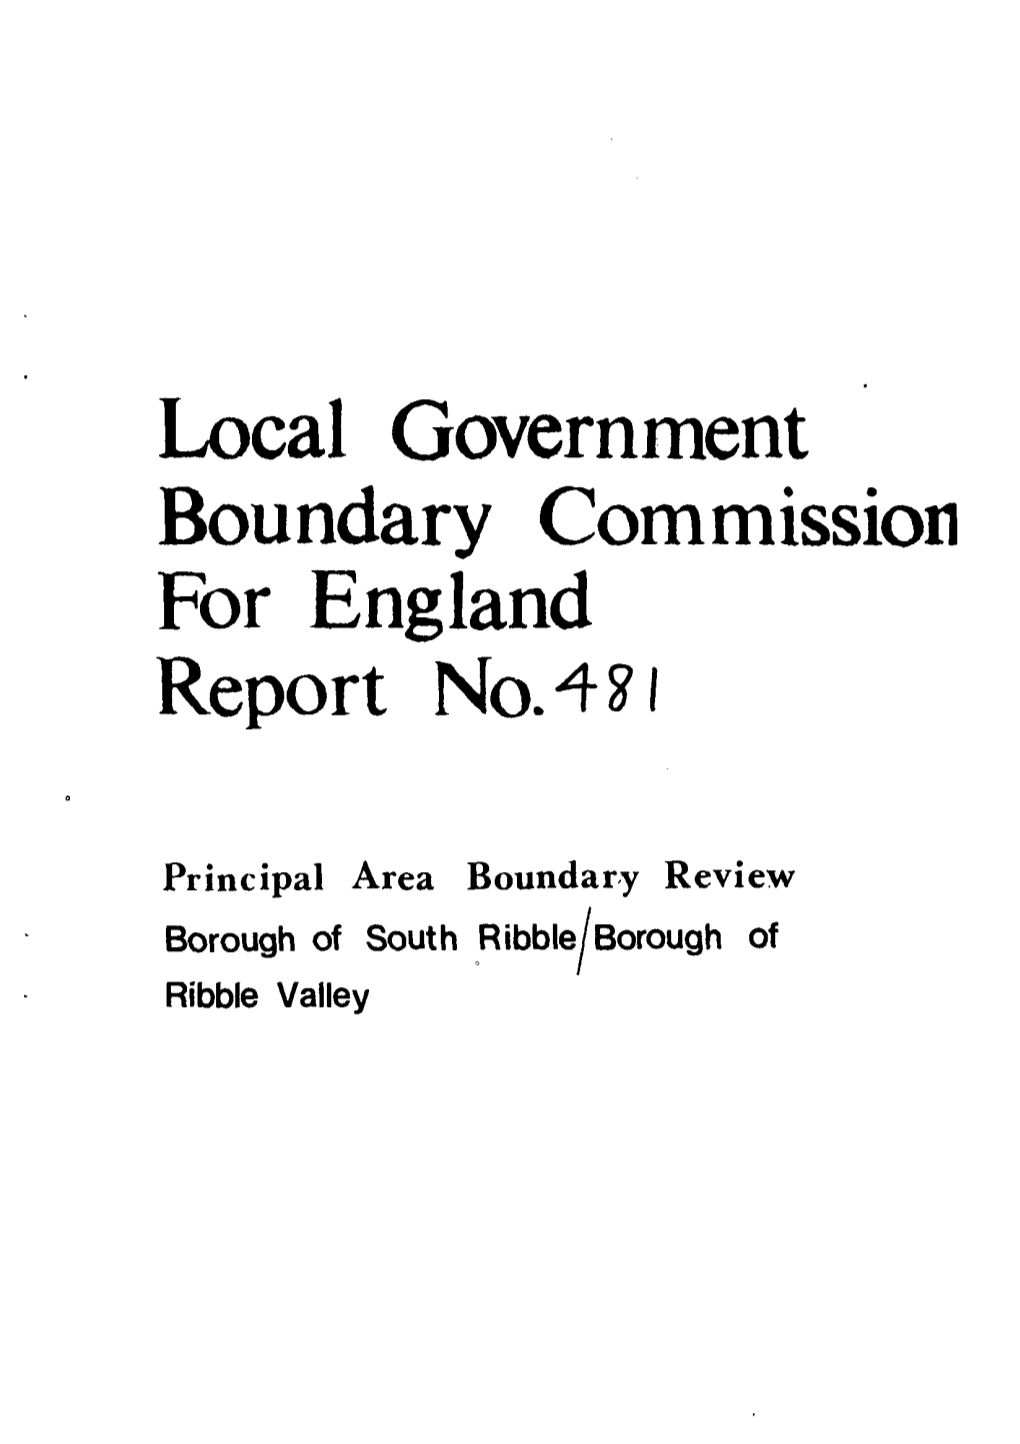 Local Government Boundary Commission for England Report No.4? I